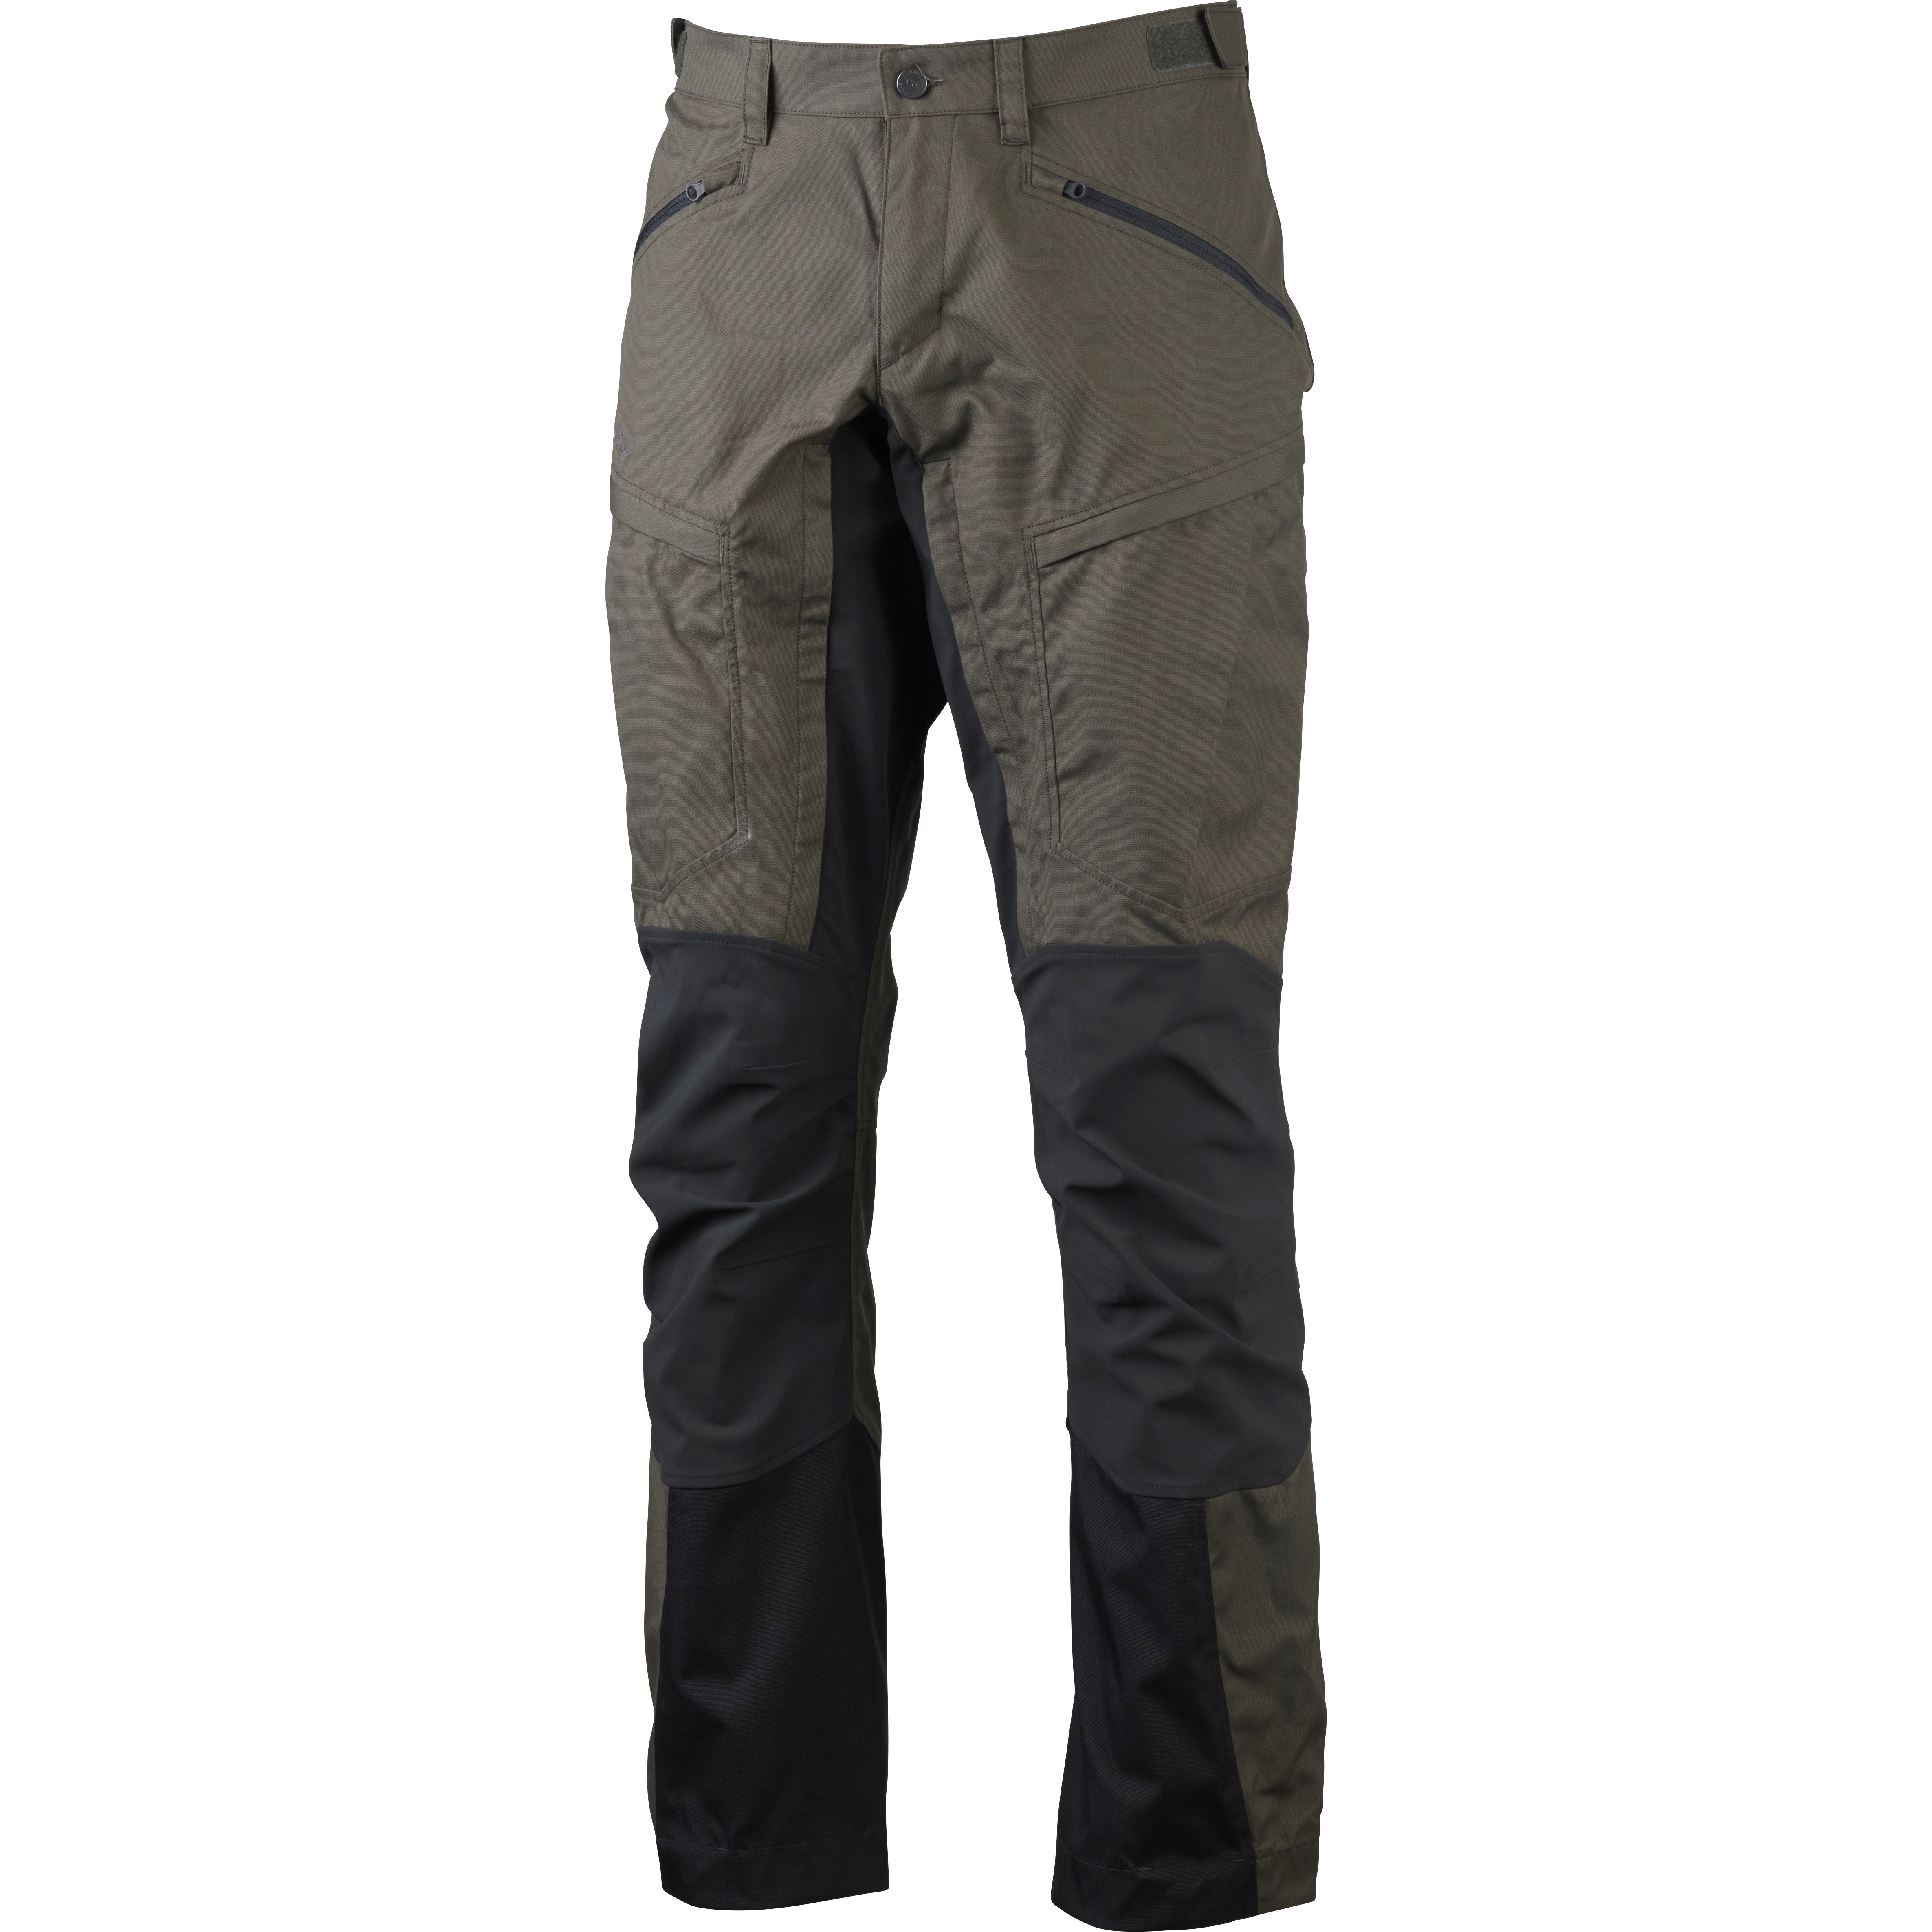 Lundhags Men’s Makke Pro Pant Forest Green/Charcoal